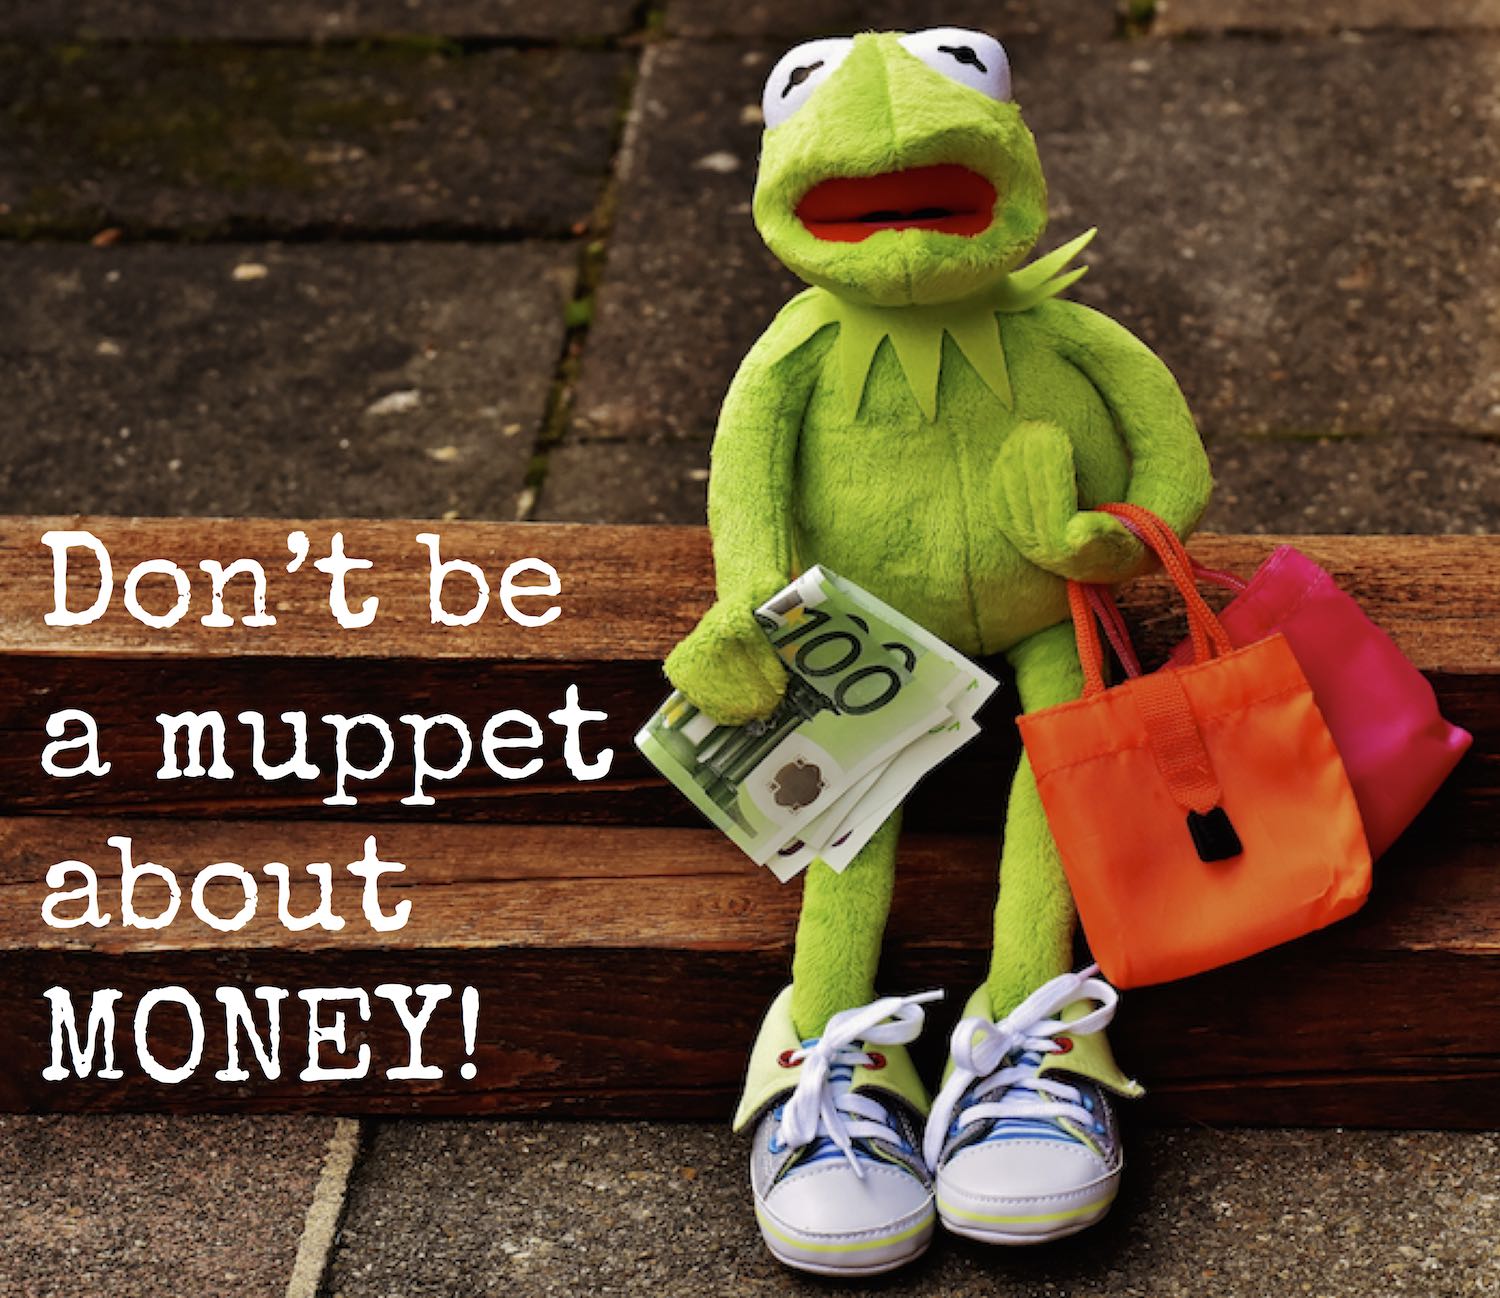 Don't be a muppet about money.